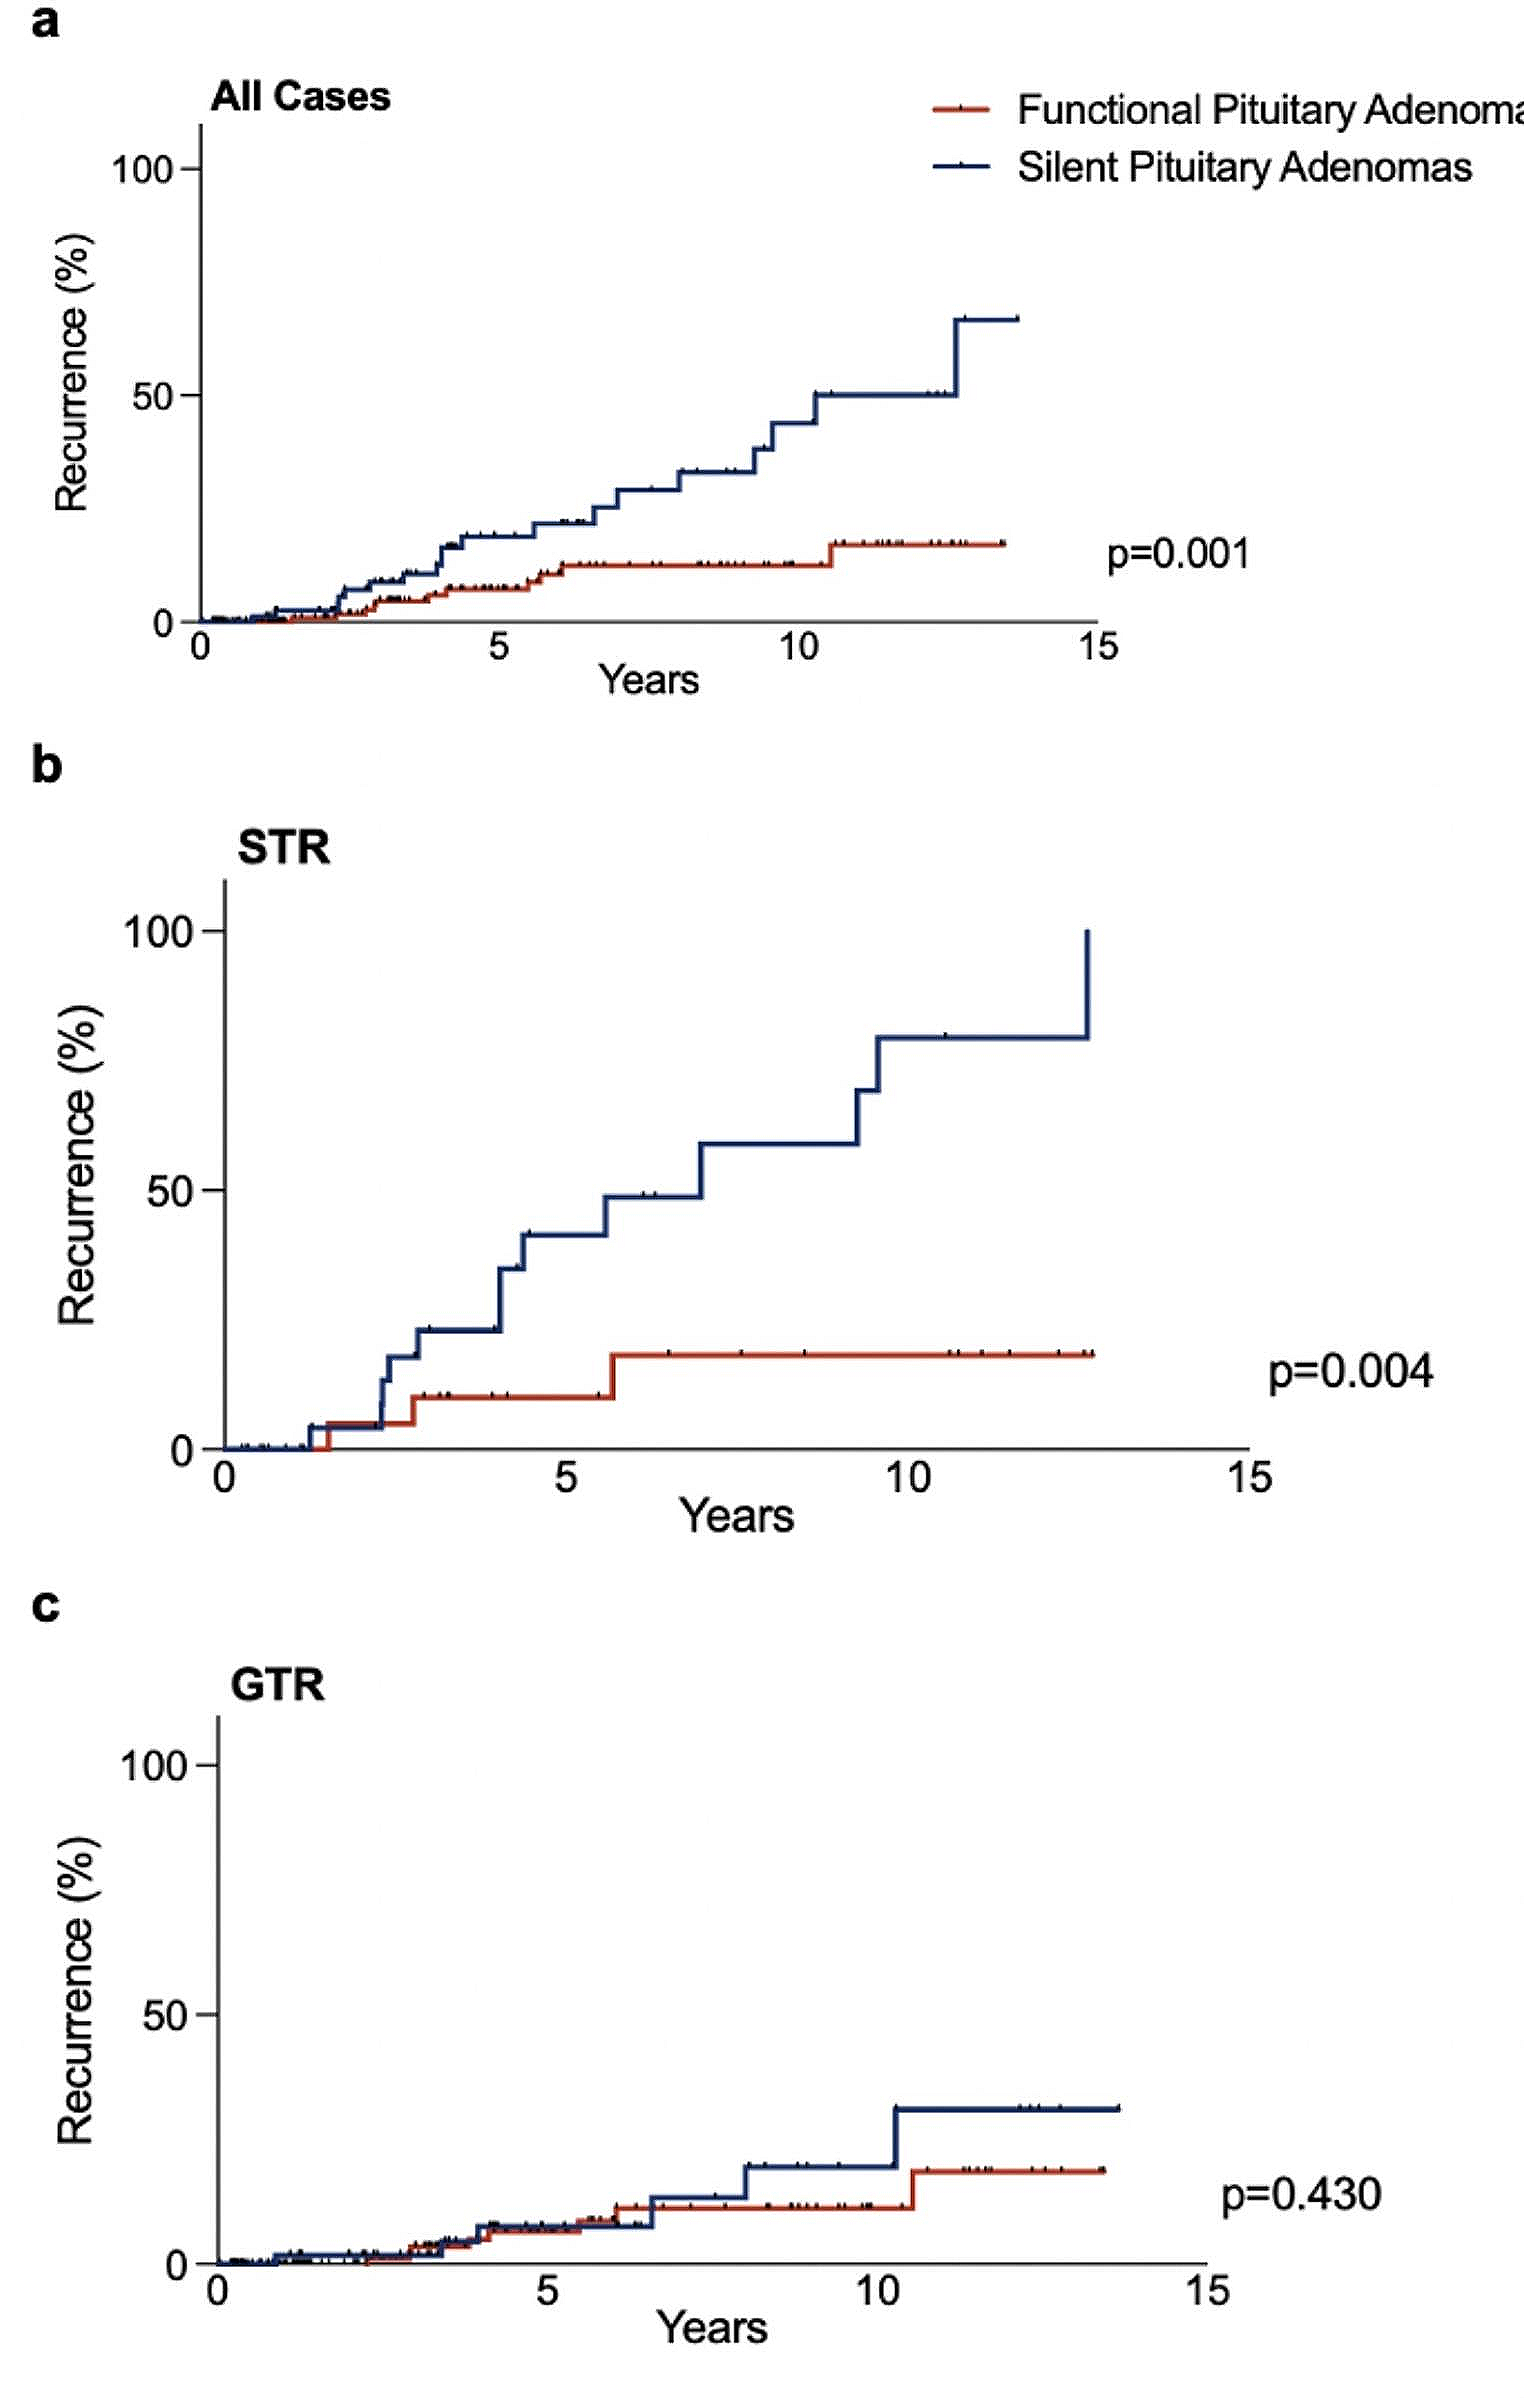 Elevated risk of recurrence and retreatment for silent pituitary adenomas